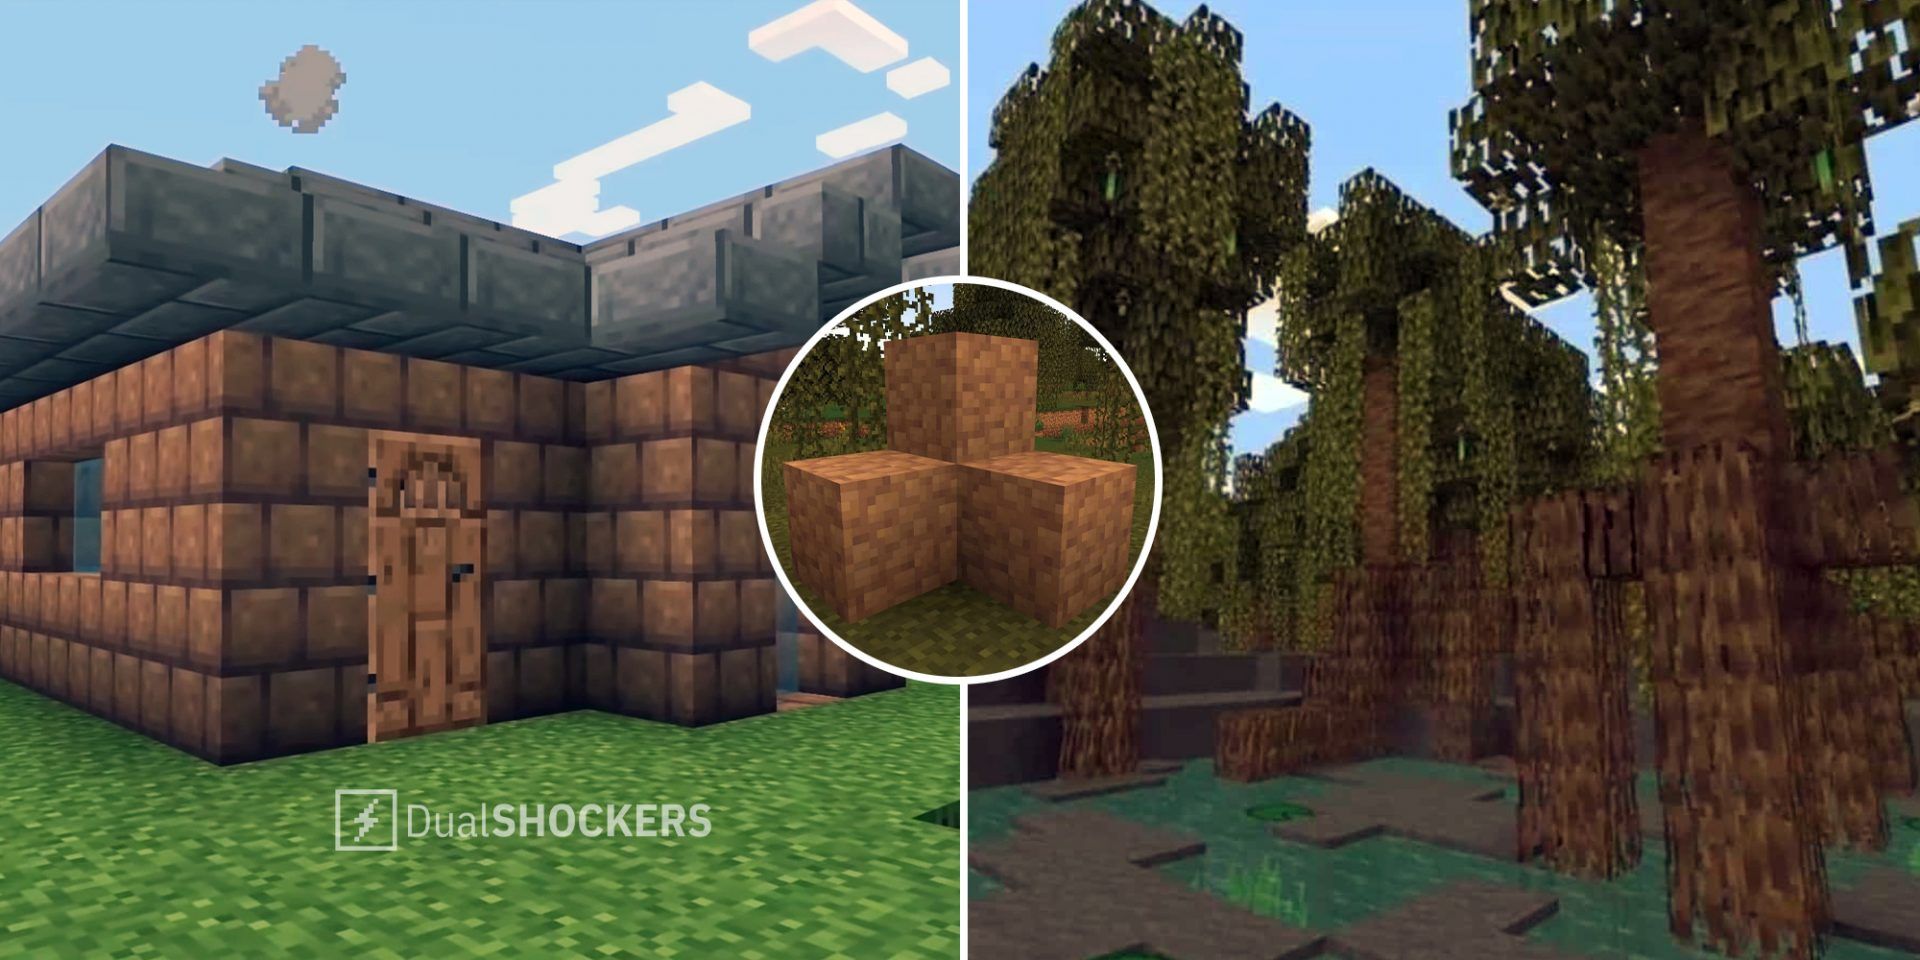 Minecraft 1.19 Update: How to Get Clay Easily